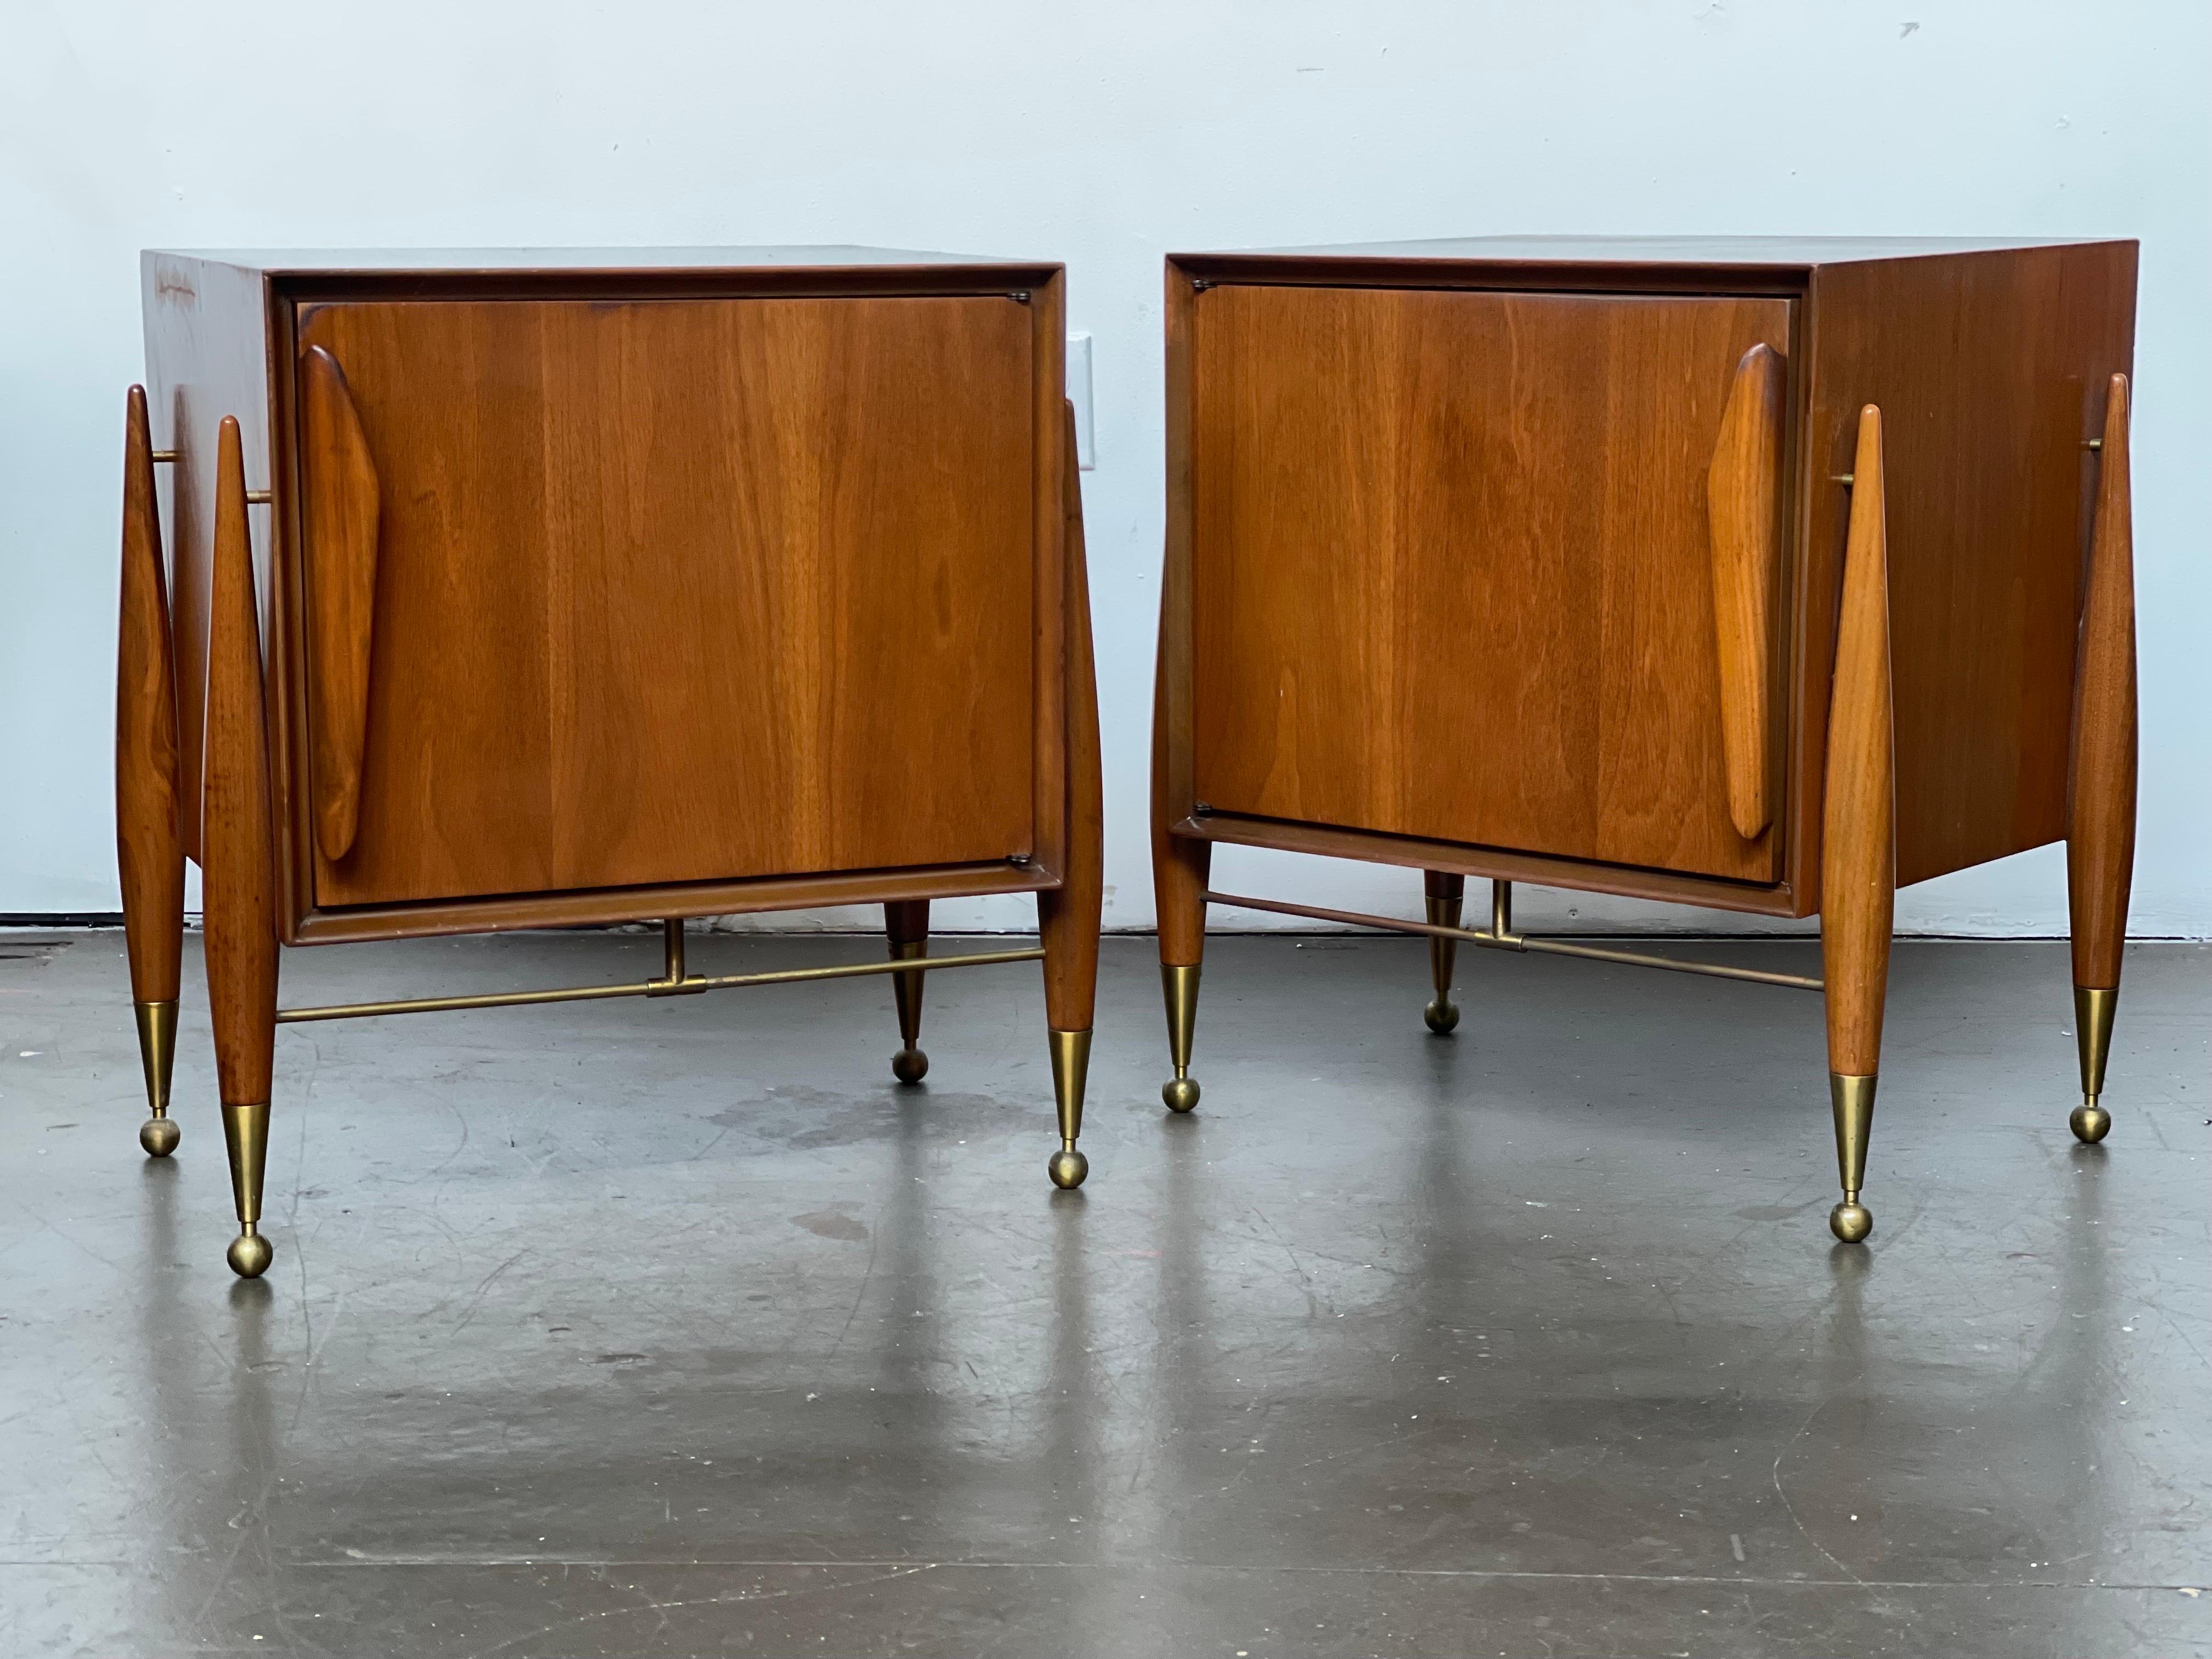 Striking Mid-Century Modern Nighstands by Specialty Woodcraft, 1957  For Sale 8